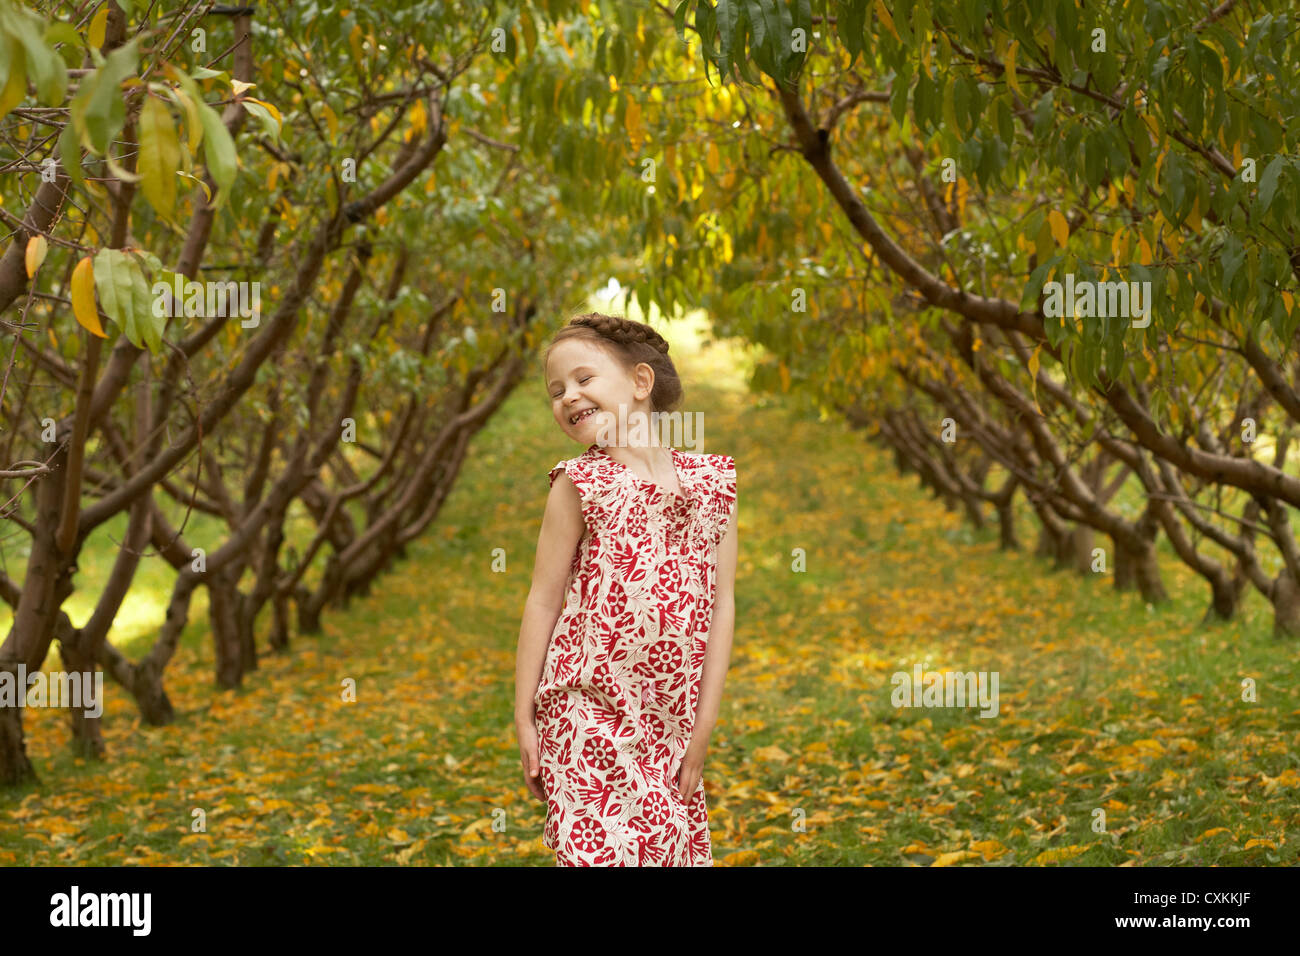 girl playing at the Peach orchard Stock Photo